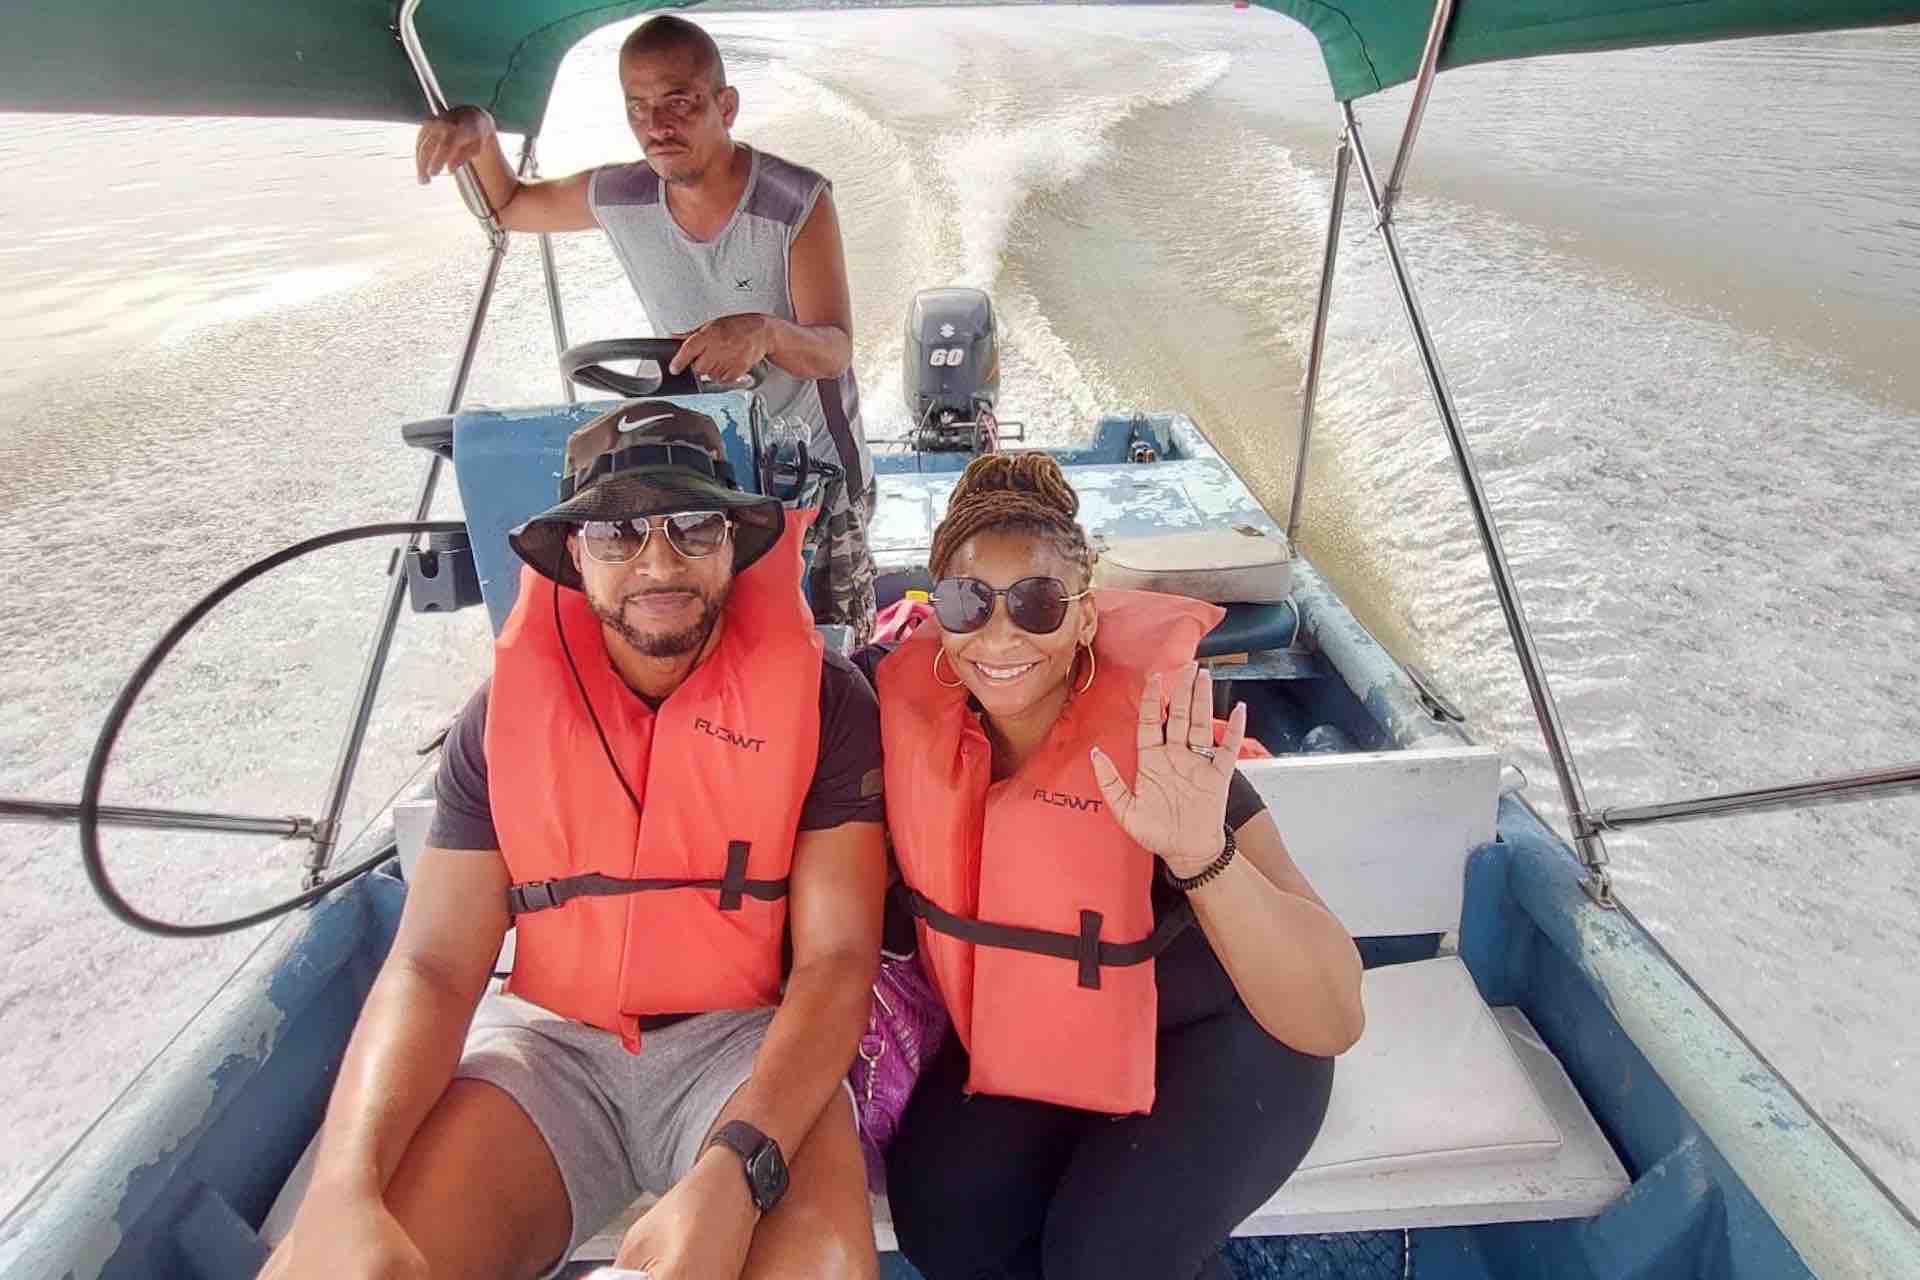 monkey island panama sloth sanctuary tour guests in speedboat rio chagres river